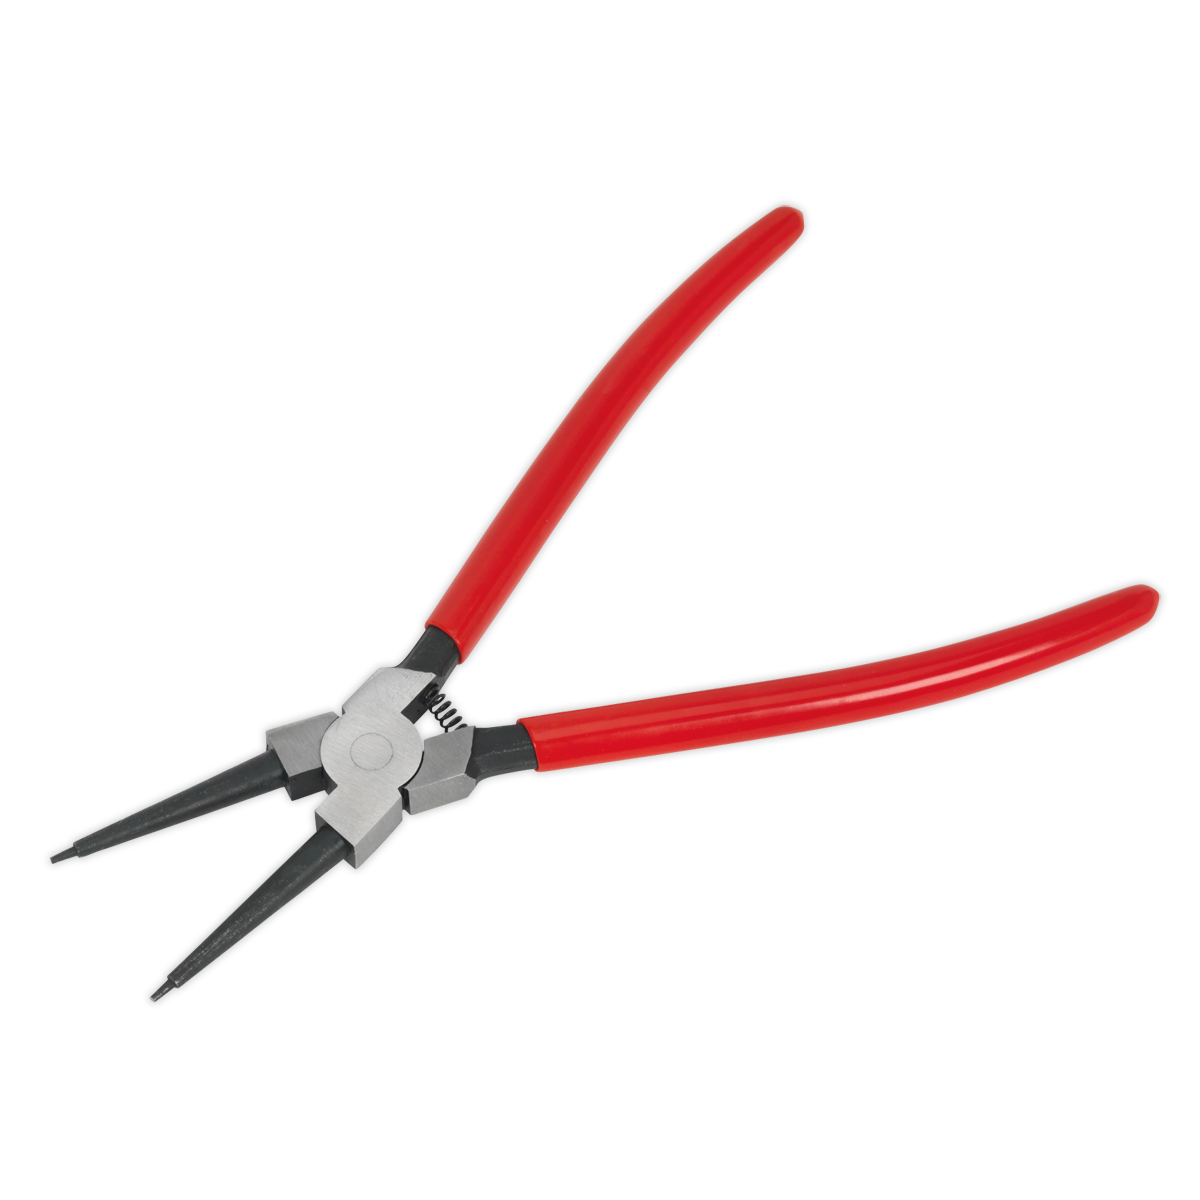 Sealey Circlip Pliers Internal Straight Nose 230mm